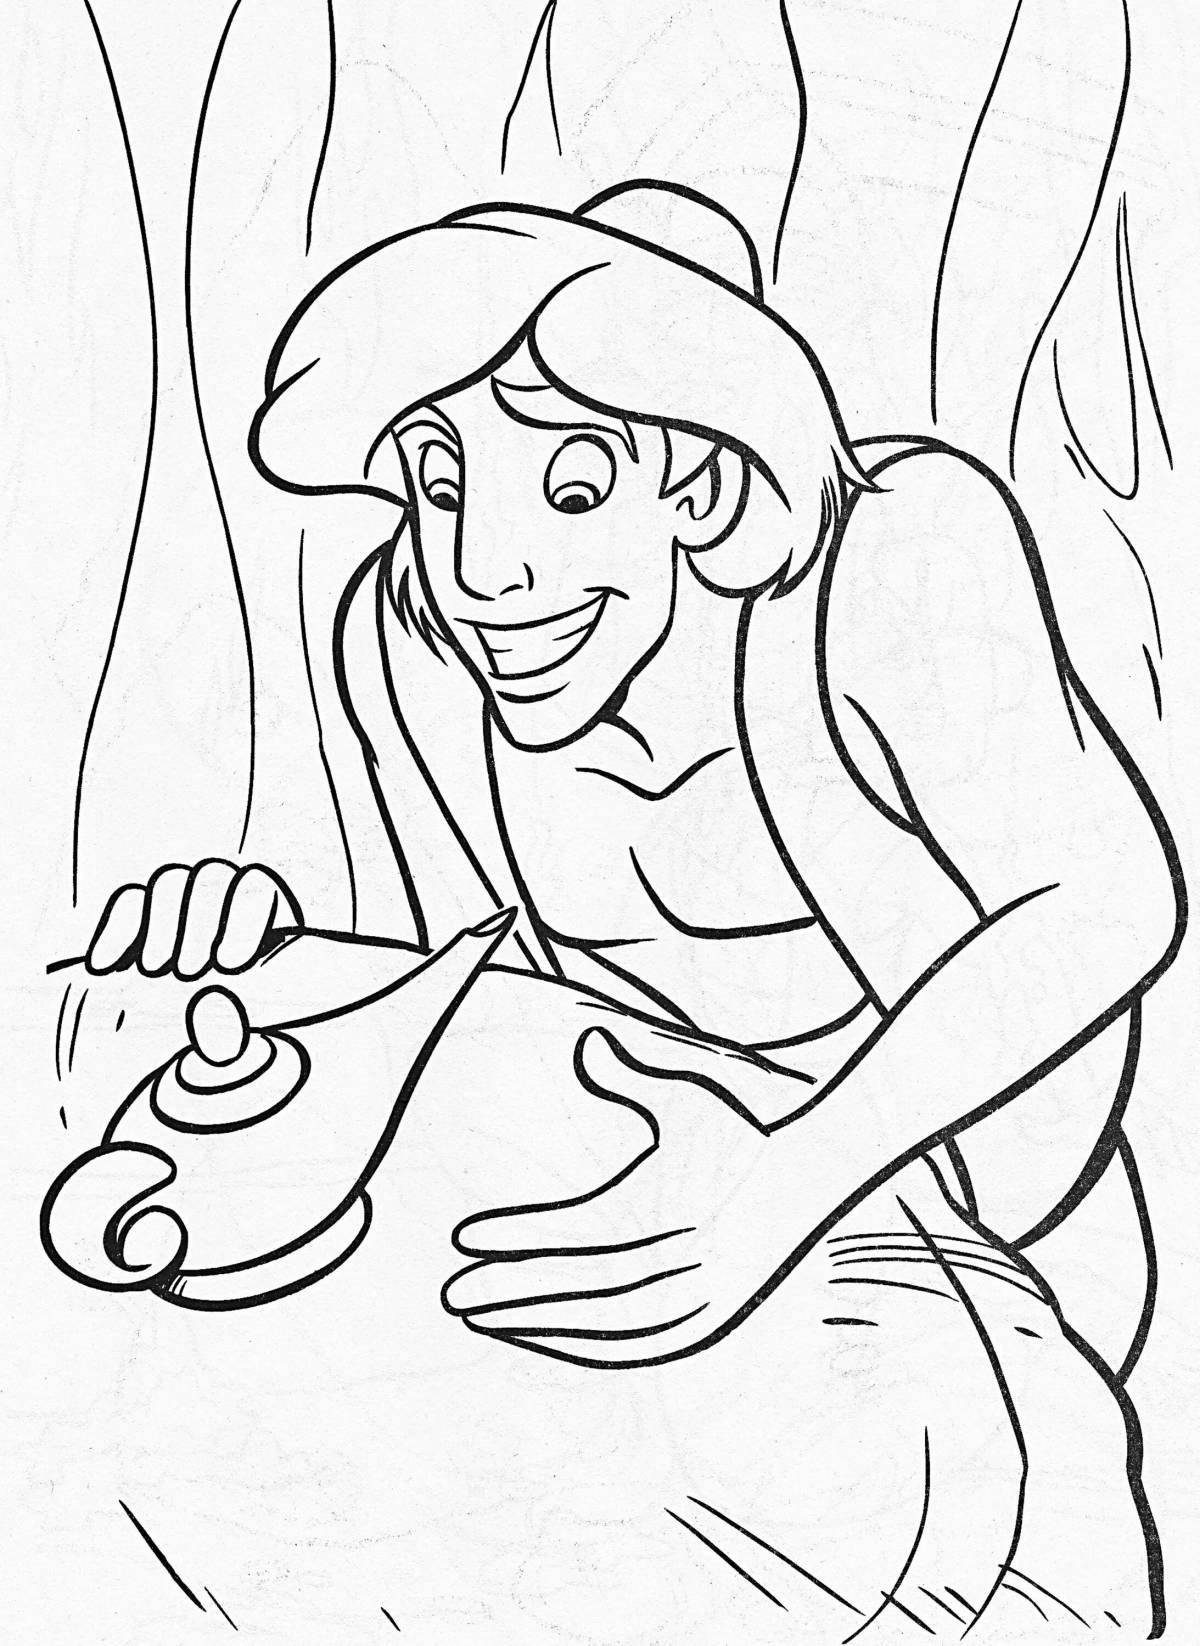 Aladdin's charming lamp coloring page